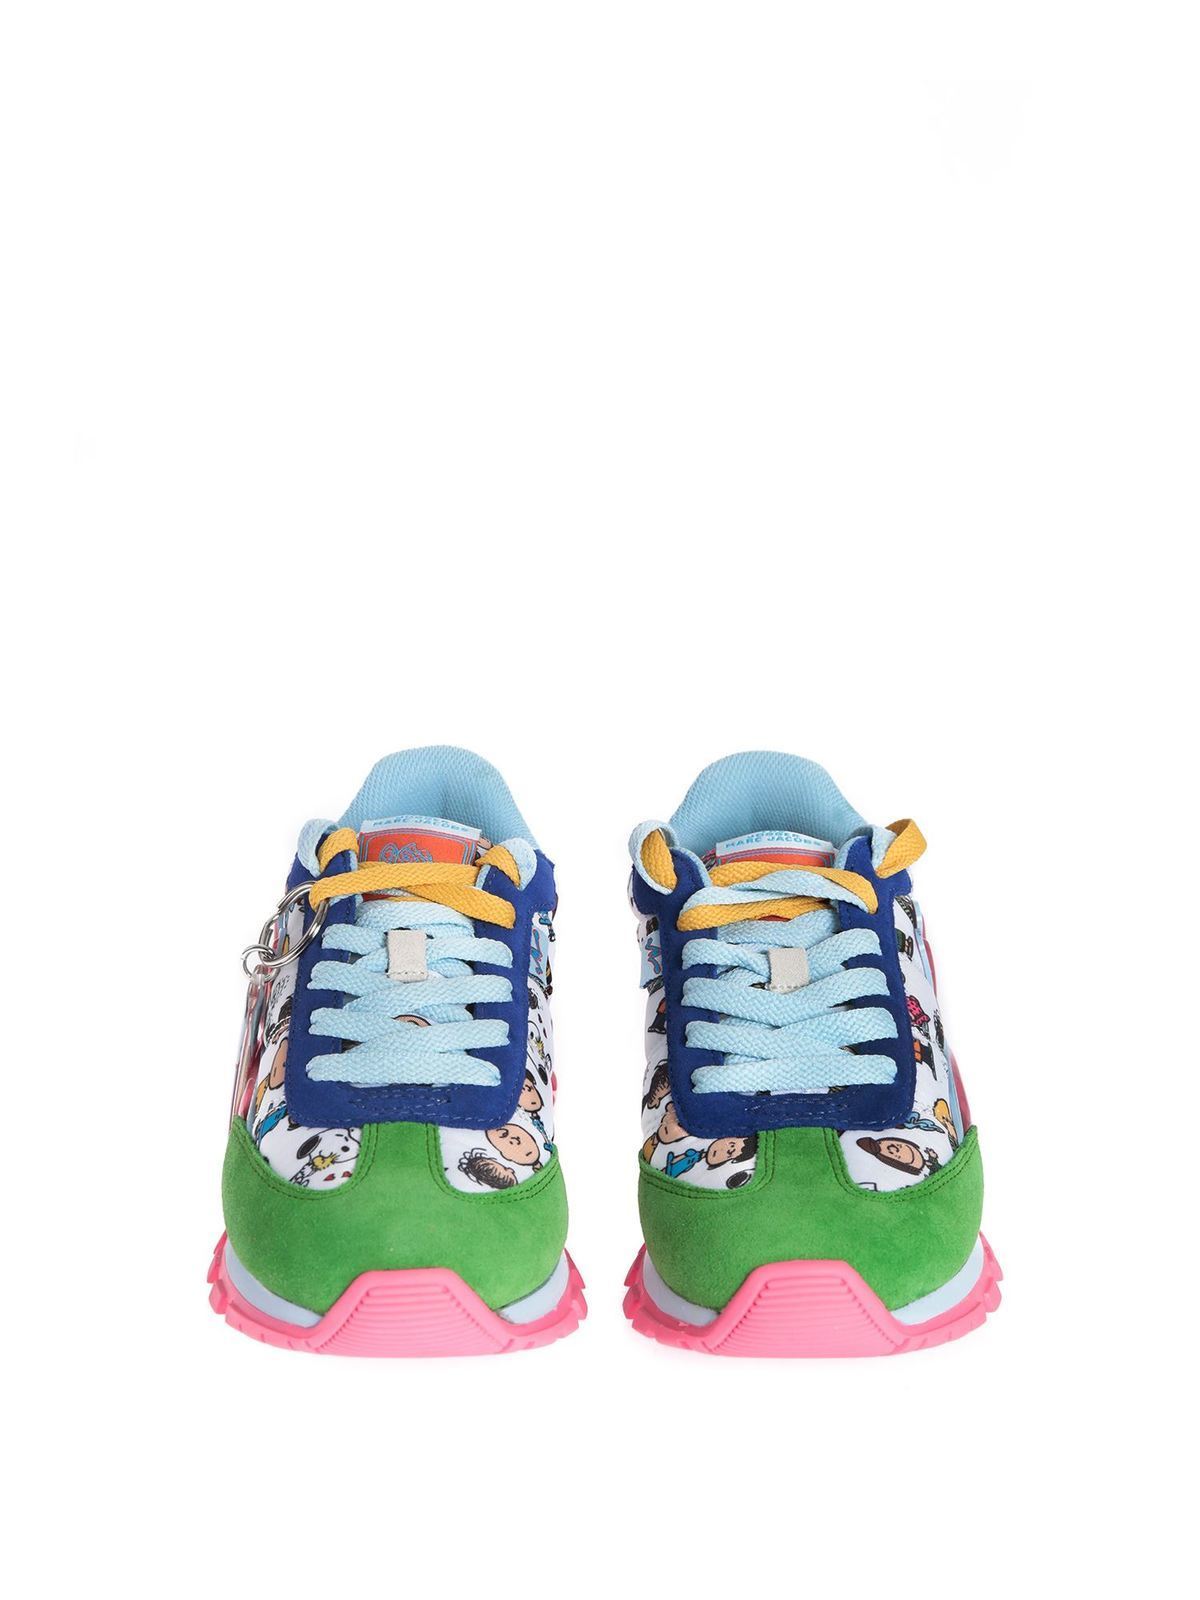 Marc Jacobs Peanuts X The Comics Jogger Sneakers in Blue